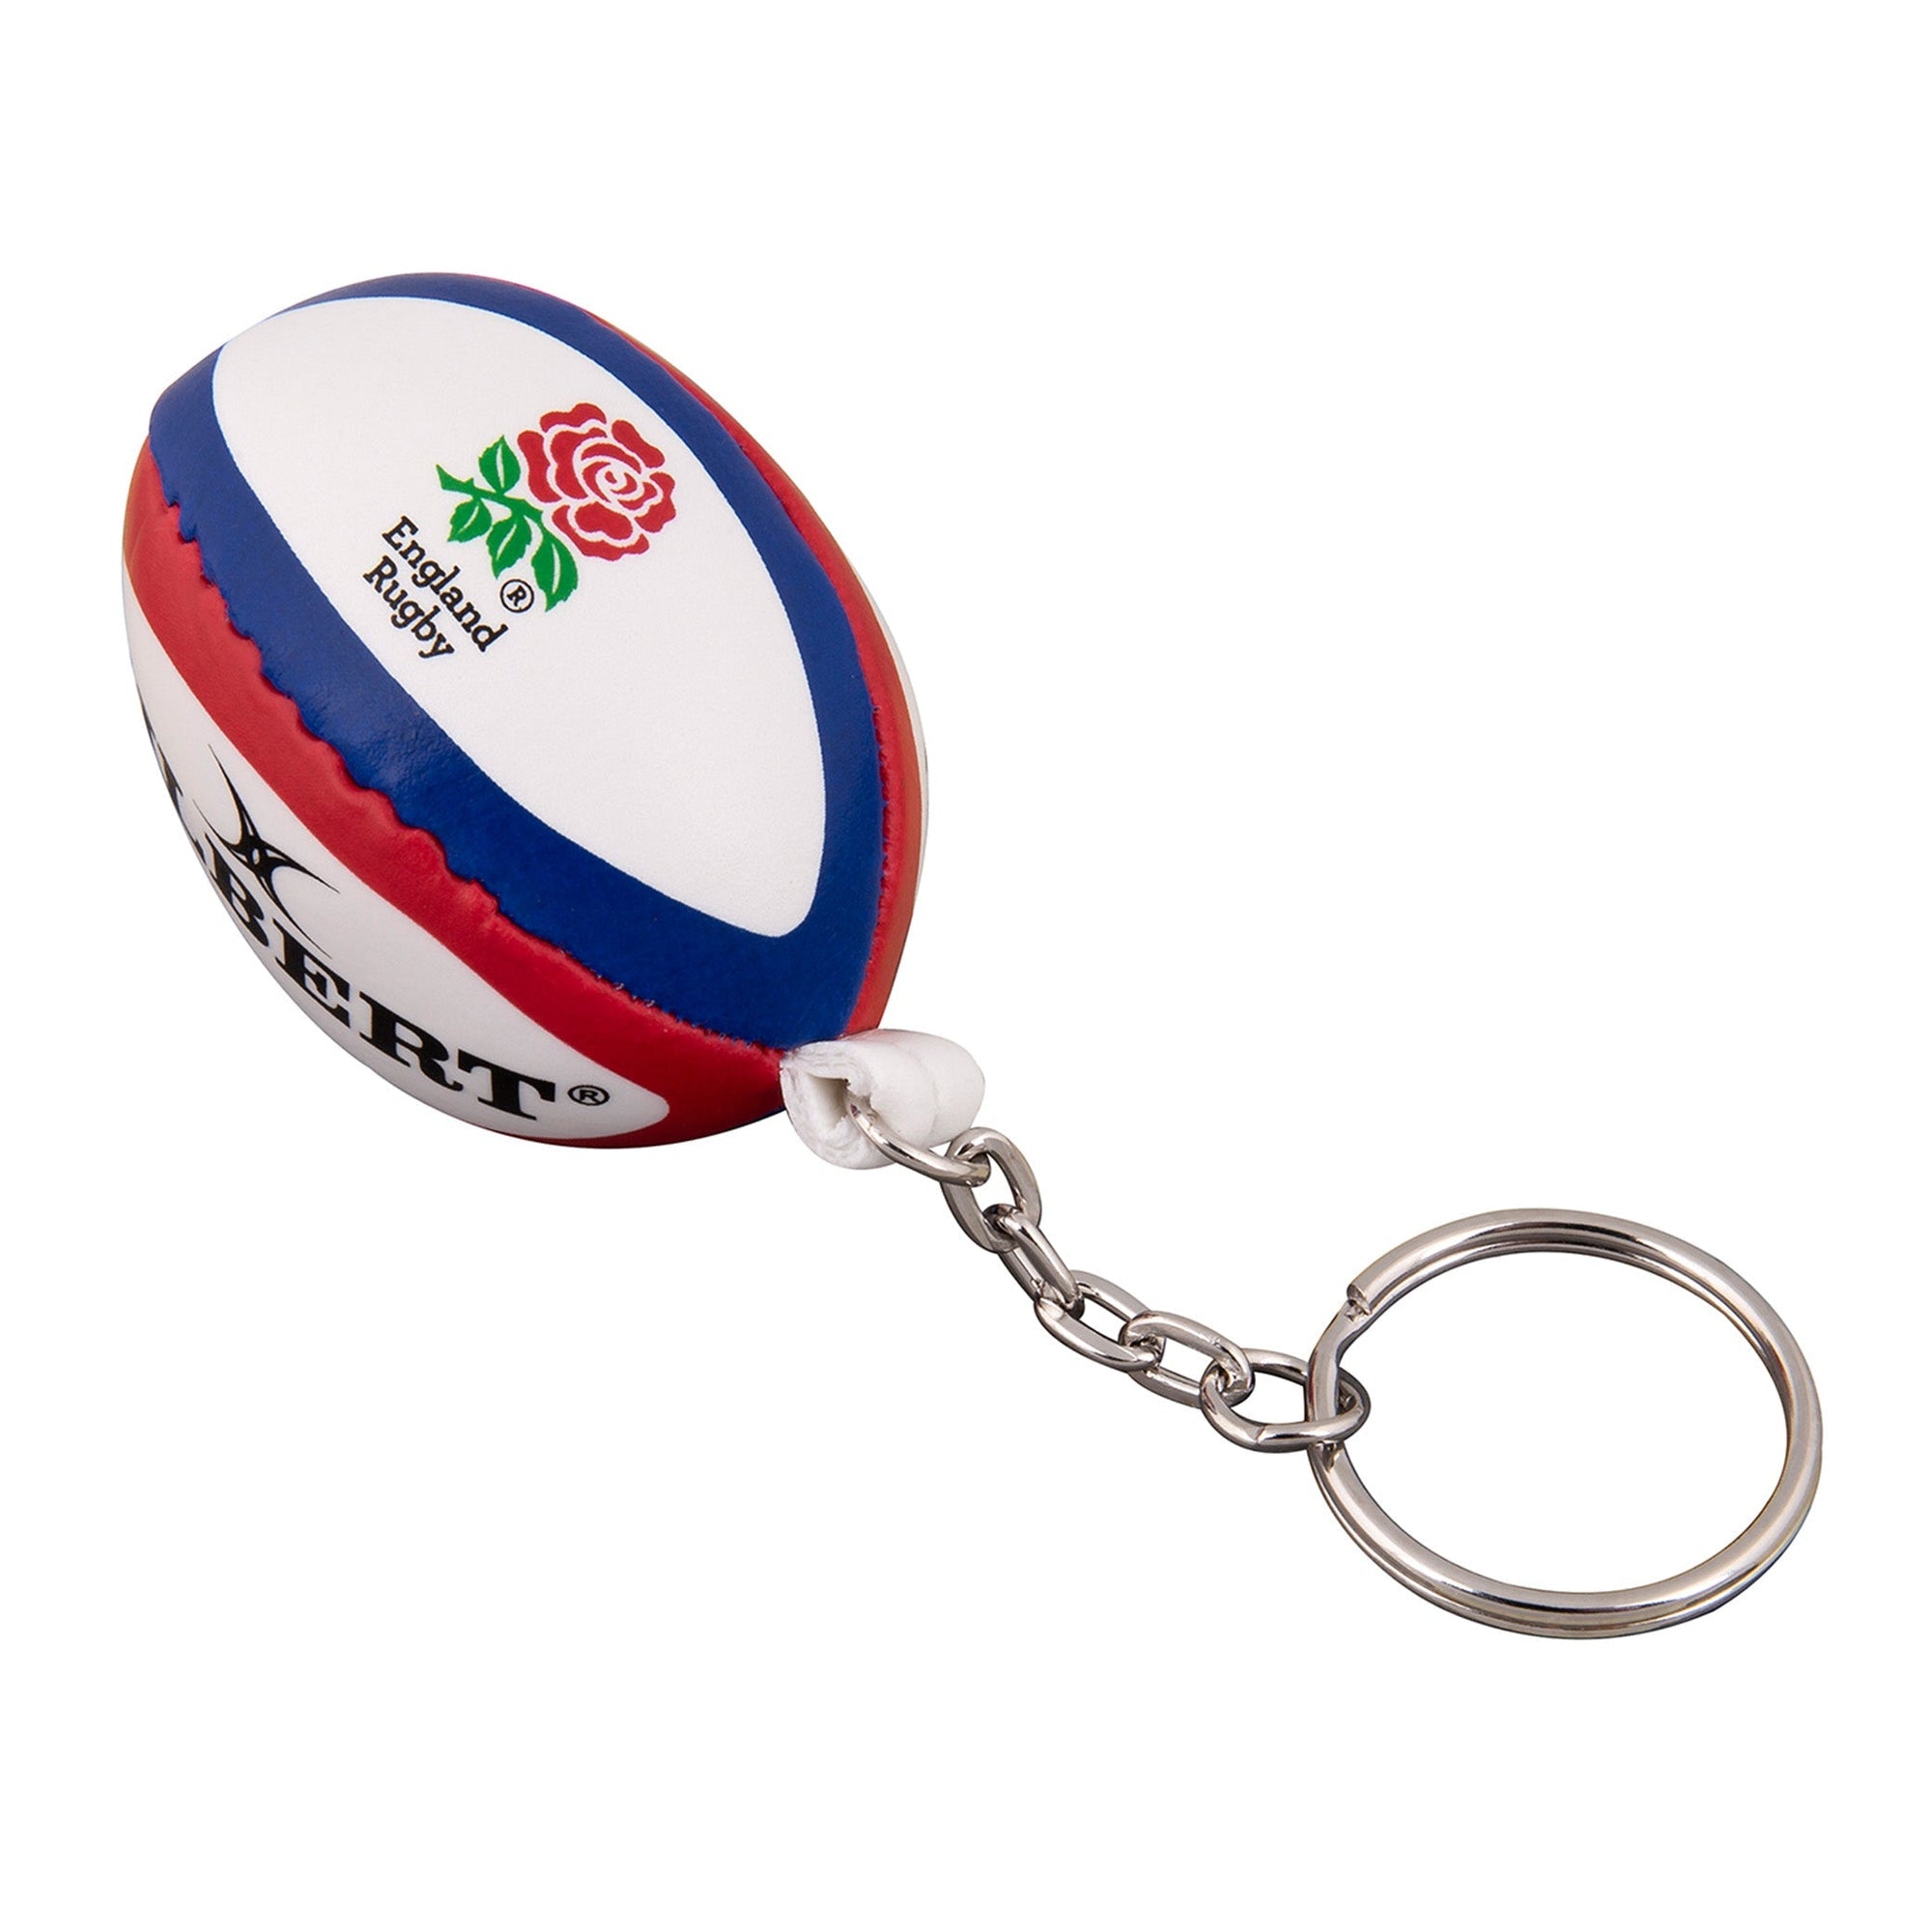 Pouoir Led football keychain rugby soccer keychain gift for man sport key  ring